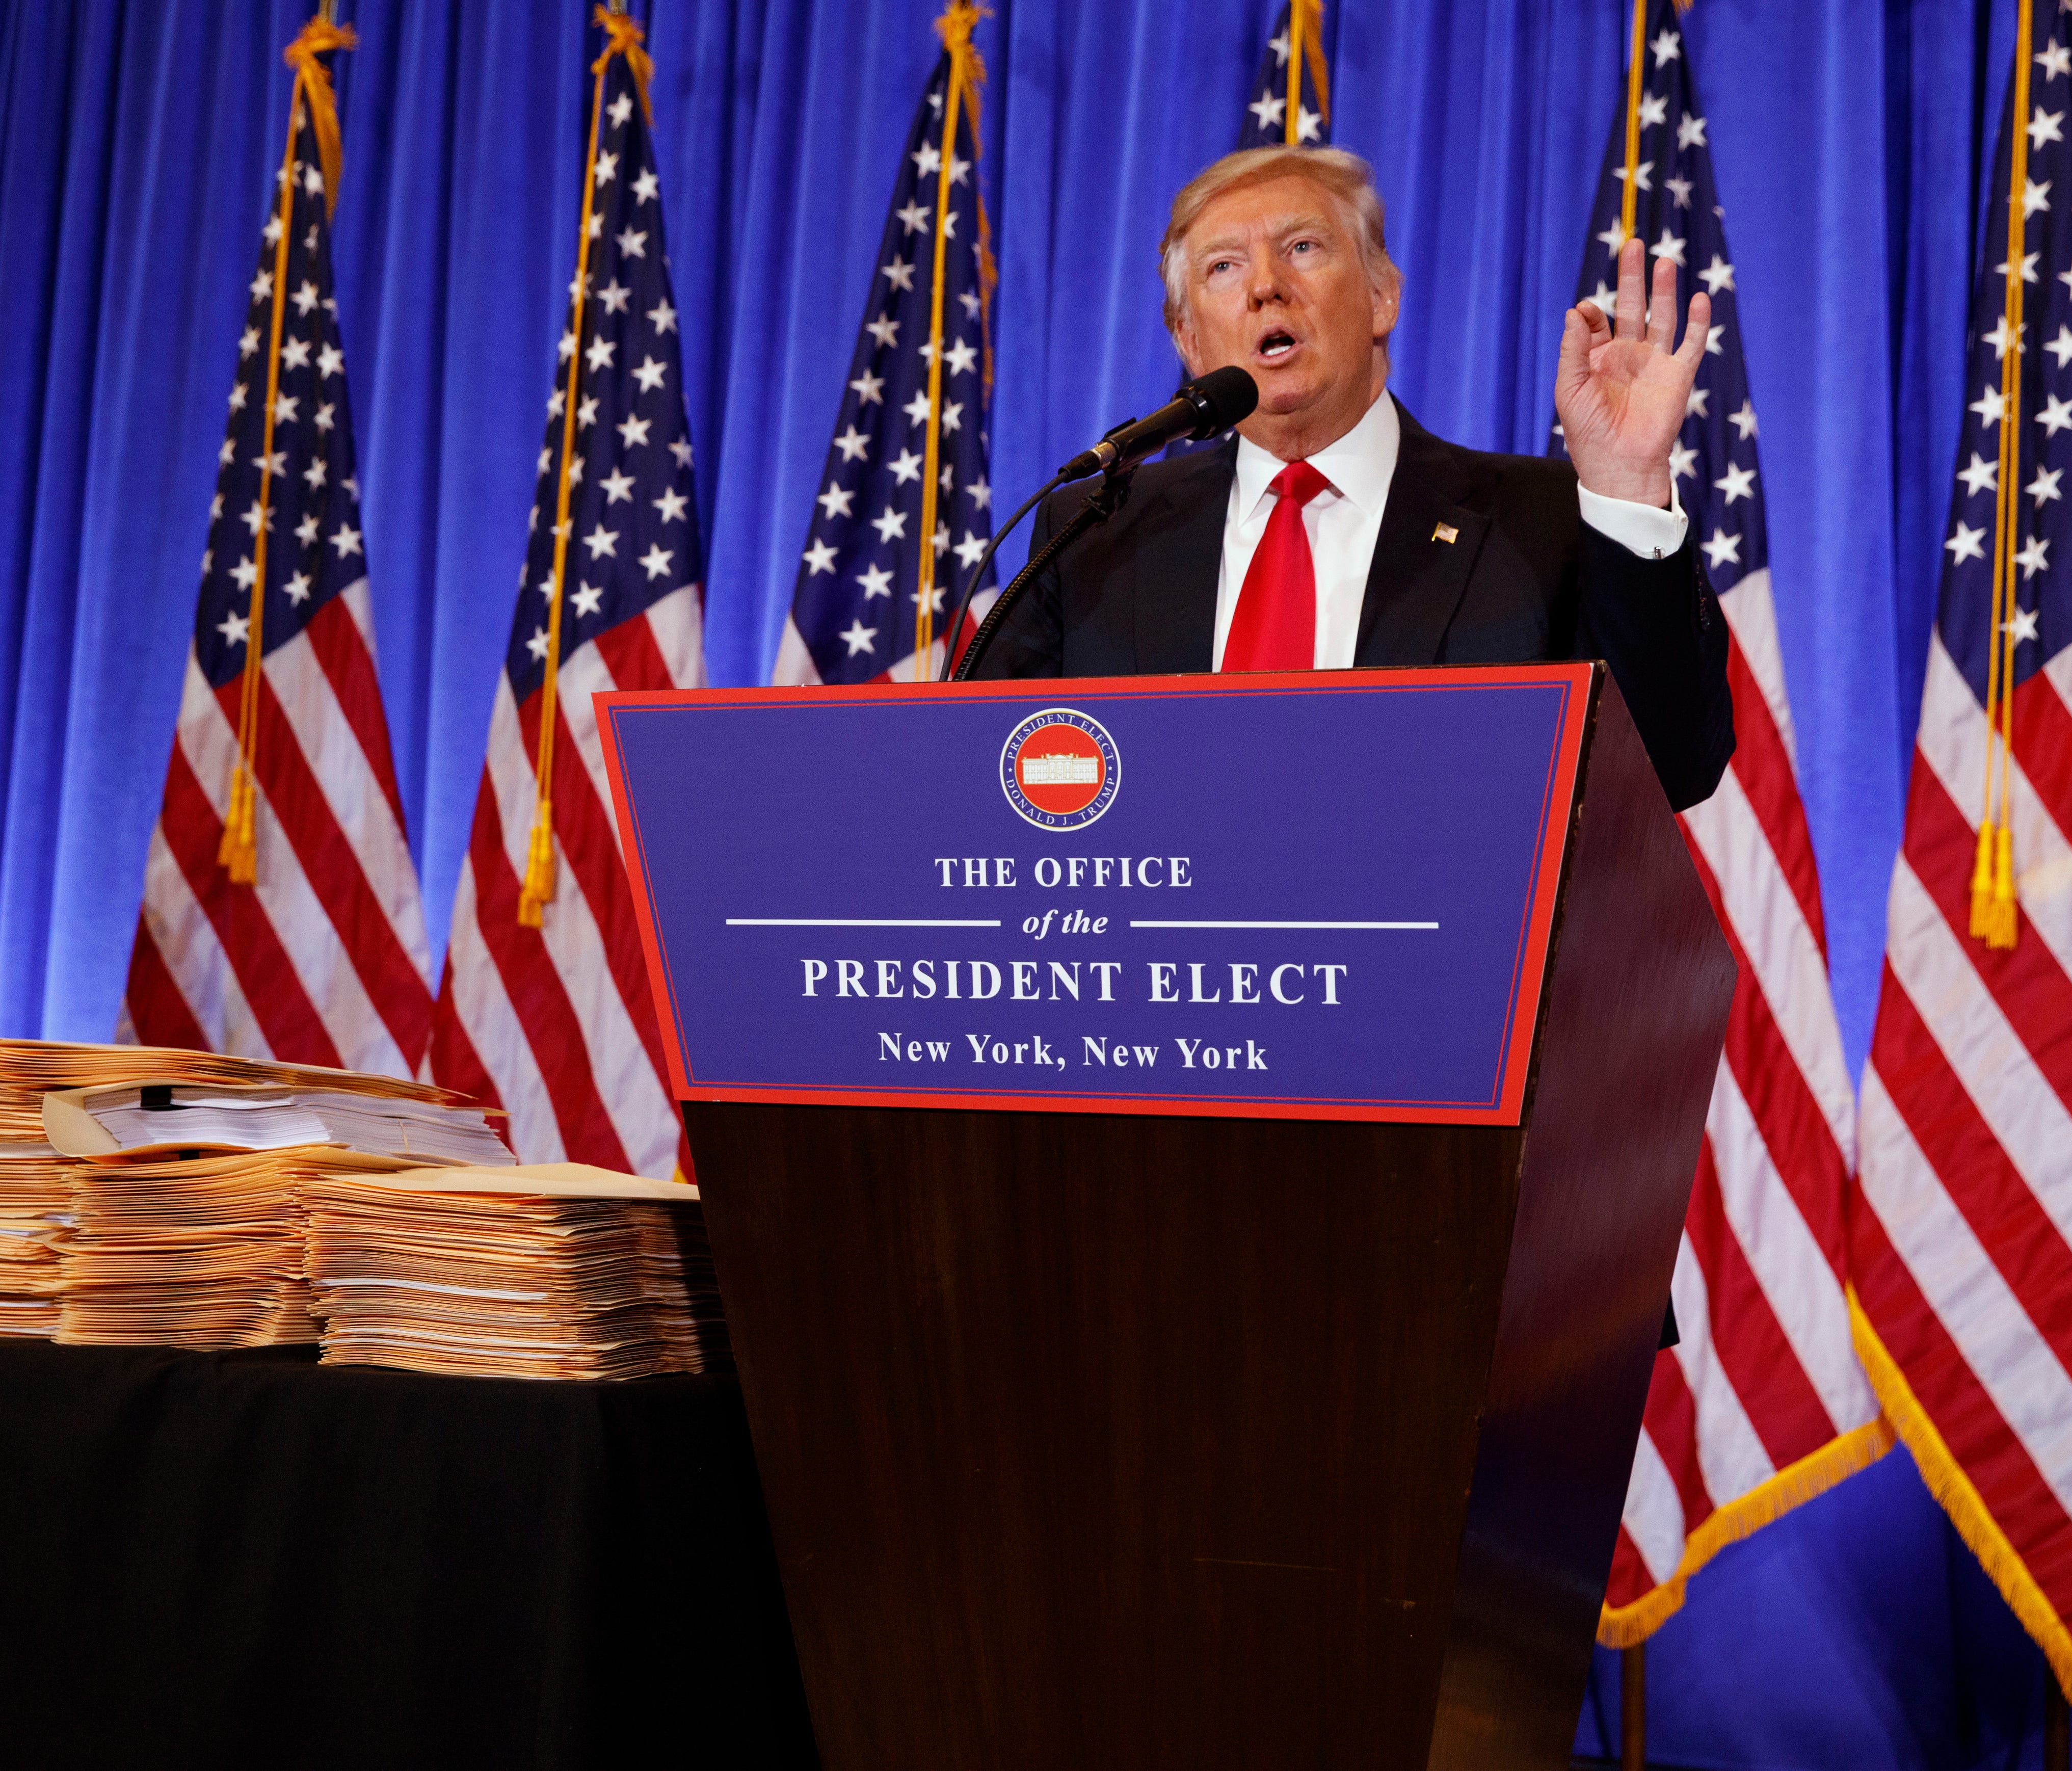 President-elect Donald Trump speaks during a news conference in the lobby of Trump Tower in New York on Jan. 11, 2017.